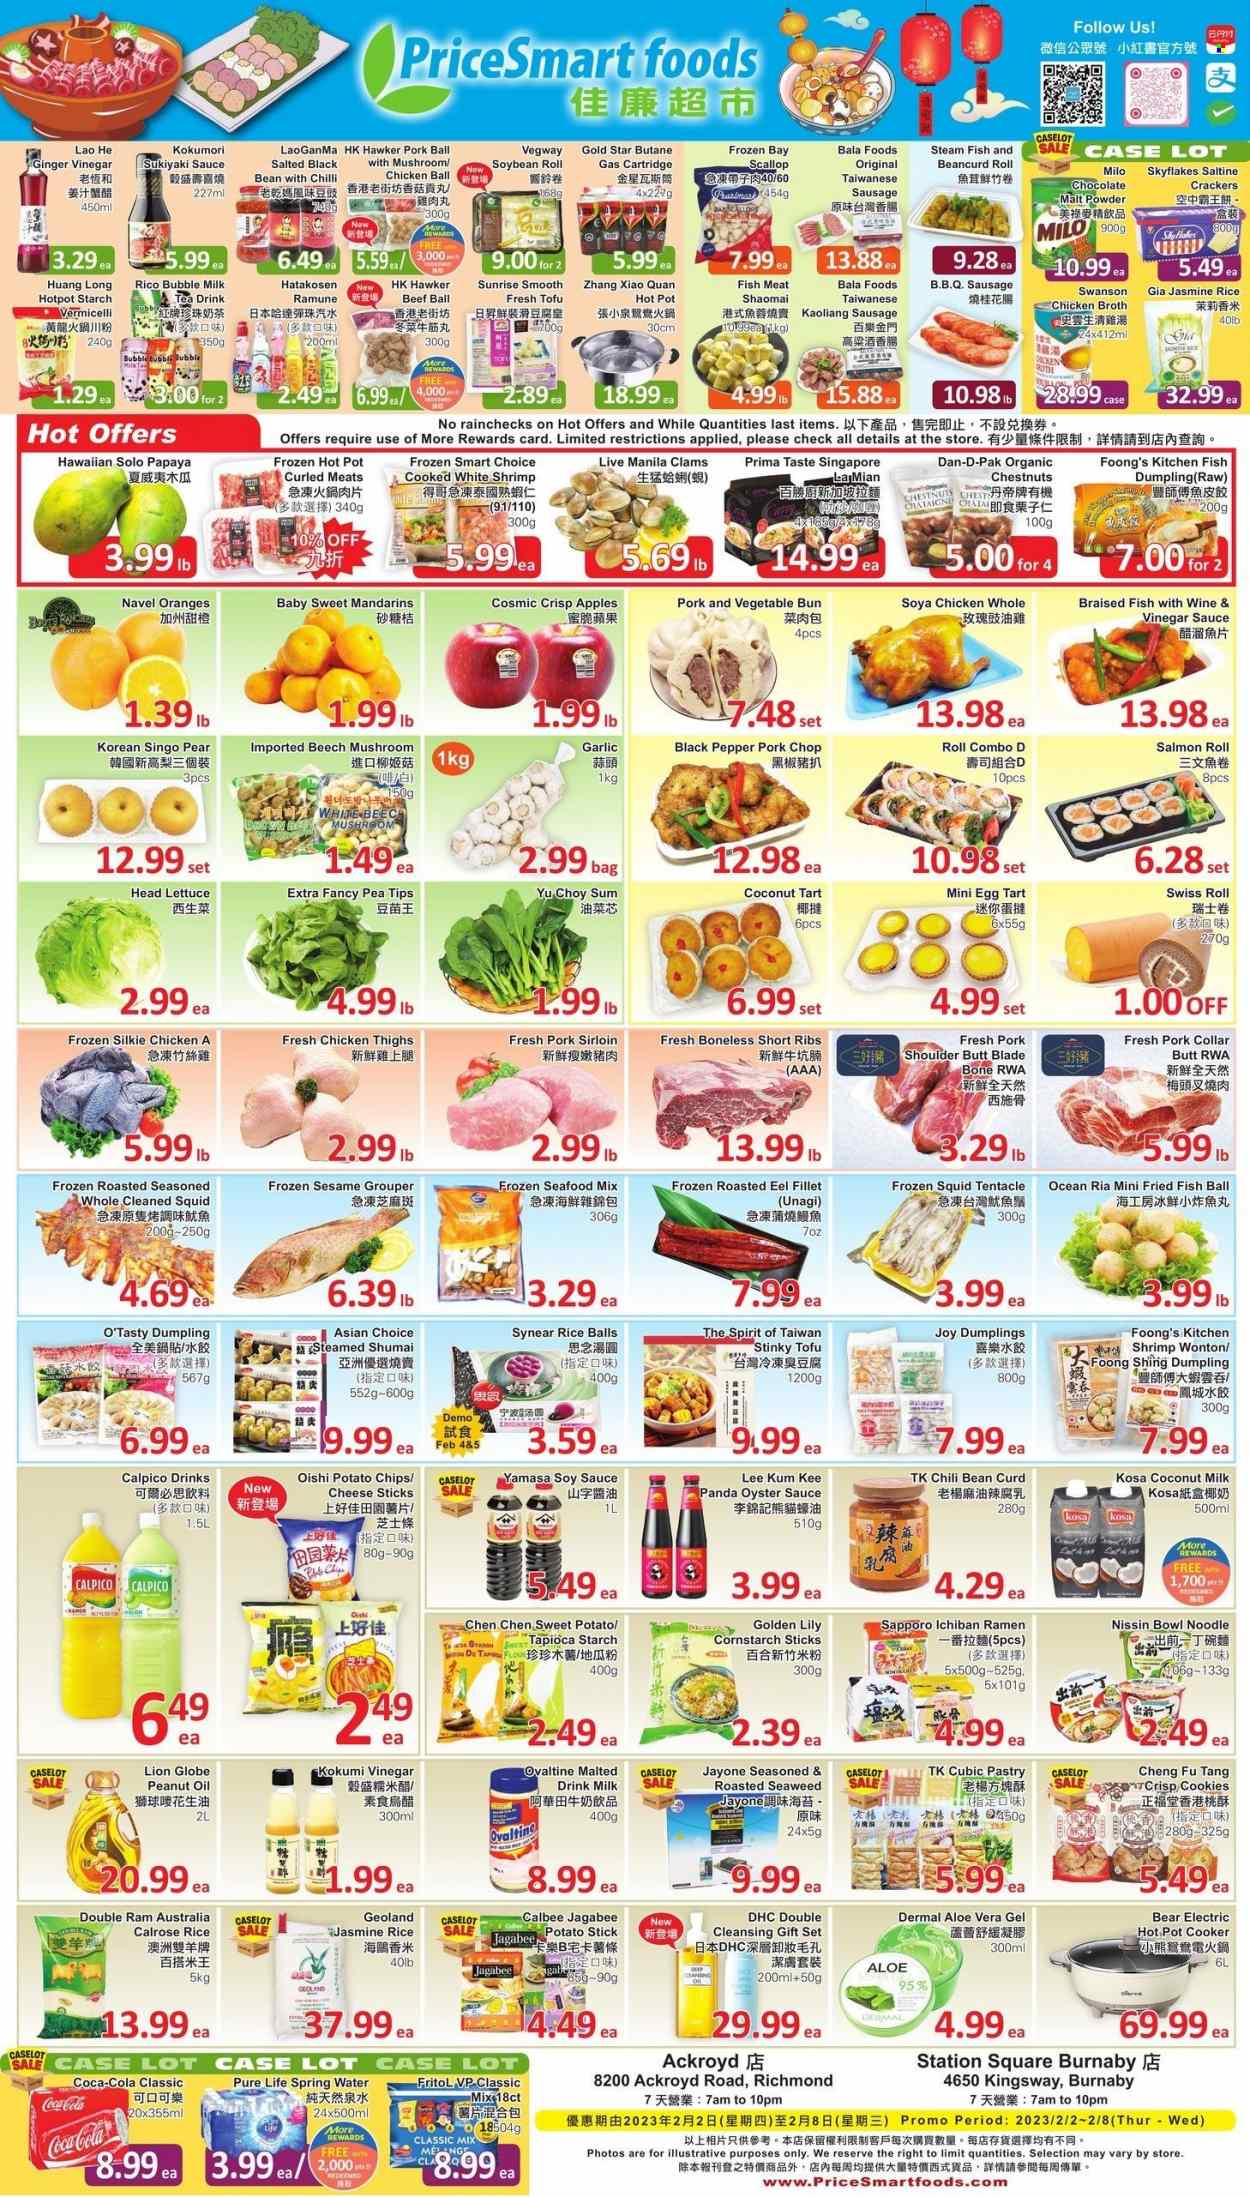 thumbnail - PriceSmart Foods Flyer - February 02, 2023 - February 08, 2023 - Sales products - swiss roll, garlic, ginger, sweet potato, lettuce, apples, mandarines, papaya, pears, oranges, navel oranges, clams, eel, grouper, scallops, squid, oysters, seafood, shrimps, fried fish, ramen, dumplings, noodles, Nissin, sausage, curd, tofu, Milo, eggs, cheese sticks, rice balls, cookies, gift set, chocolate, crackers, Skyflakes, potato chips, cornstarch, starch, tapioca starch, chicken broth, seaweed, broth, coconut milk, jasmine rice, black pepper, soy sauce, oyster sauce, Lee Kum Kee, peanut oil, oil, Laoganma, chestnuts, Coca-Cola, spring water, tea, whole chicken, chicken thighs, chicken, ribs, pork chops, pork loin, pork meat, Joy, pot, pin, panda. Page 1.